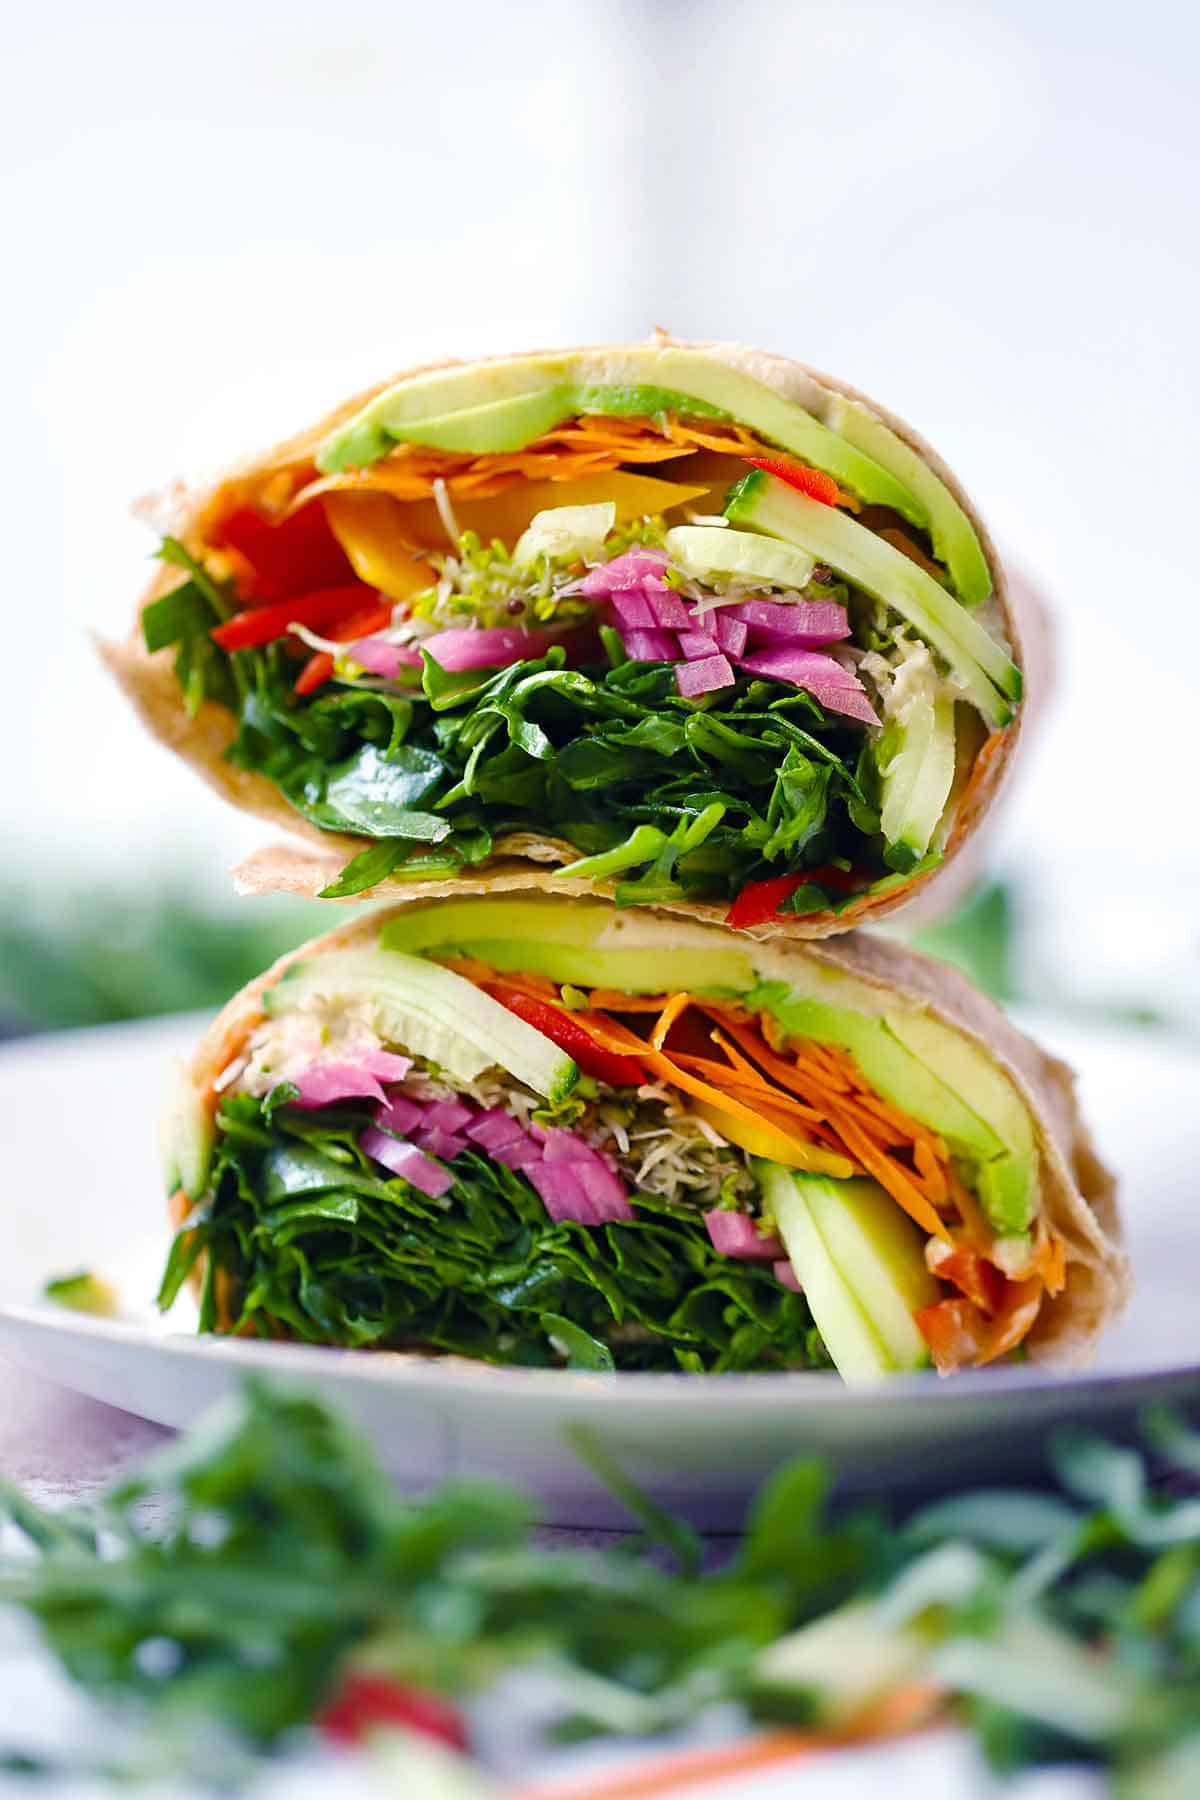 A veggie wrap cut in half and stacked on a white plate, showing the rainbow of vegetables, hummus, and avocado inside.